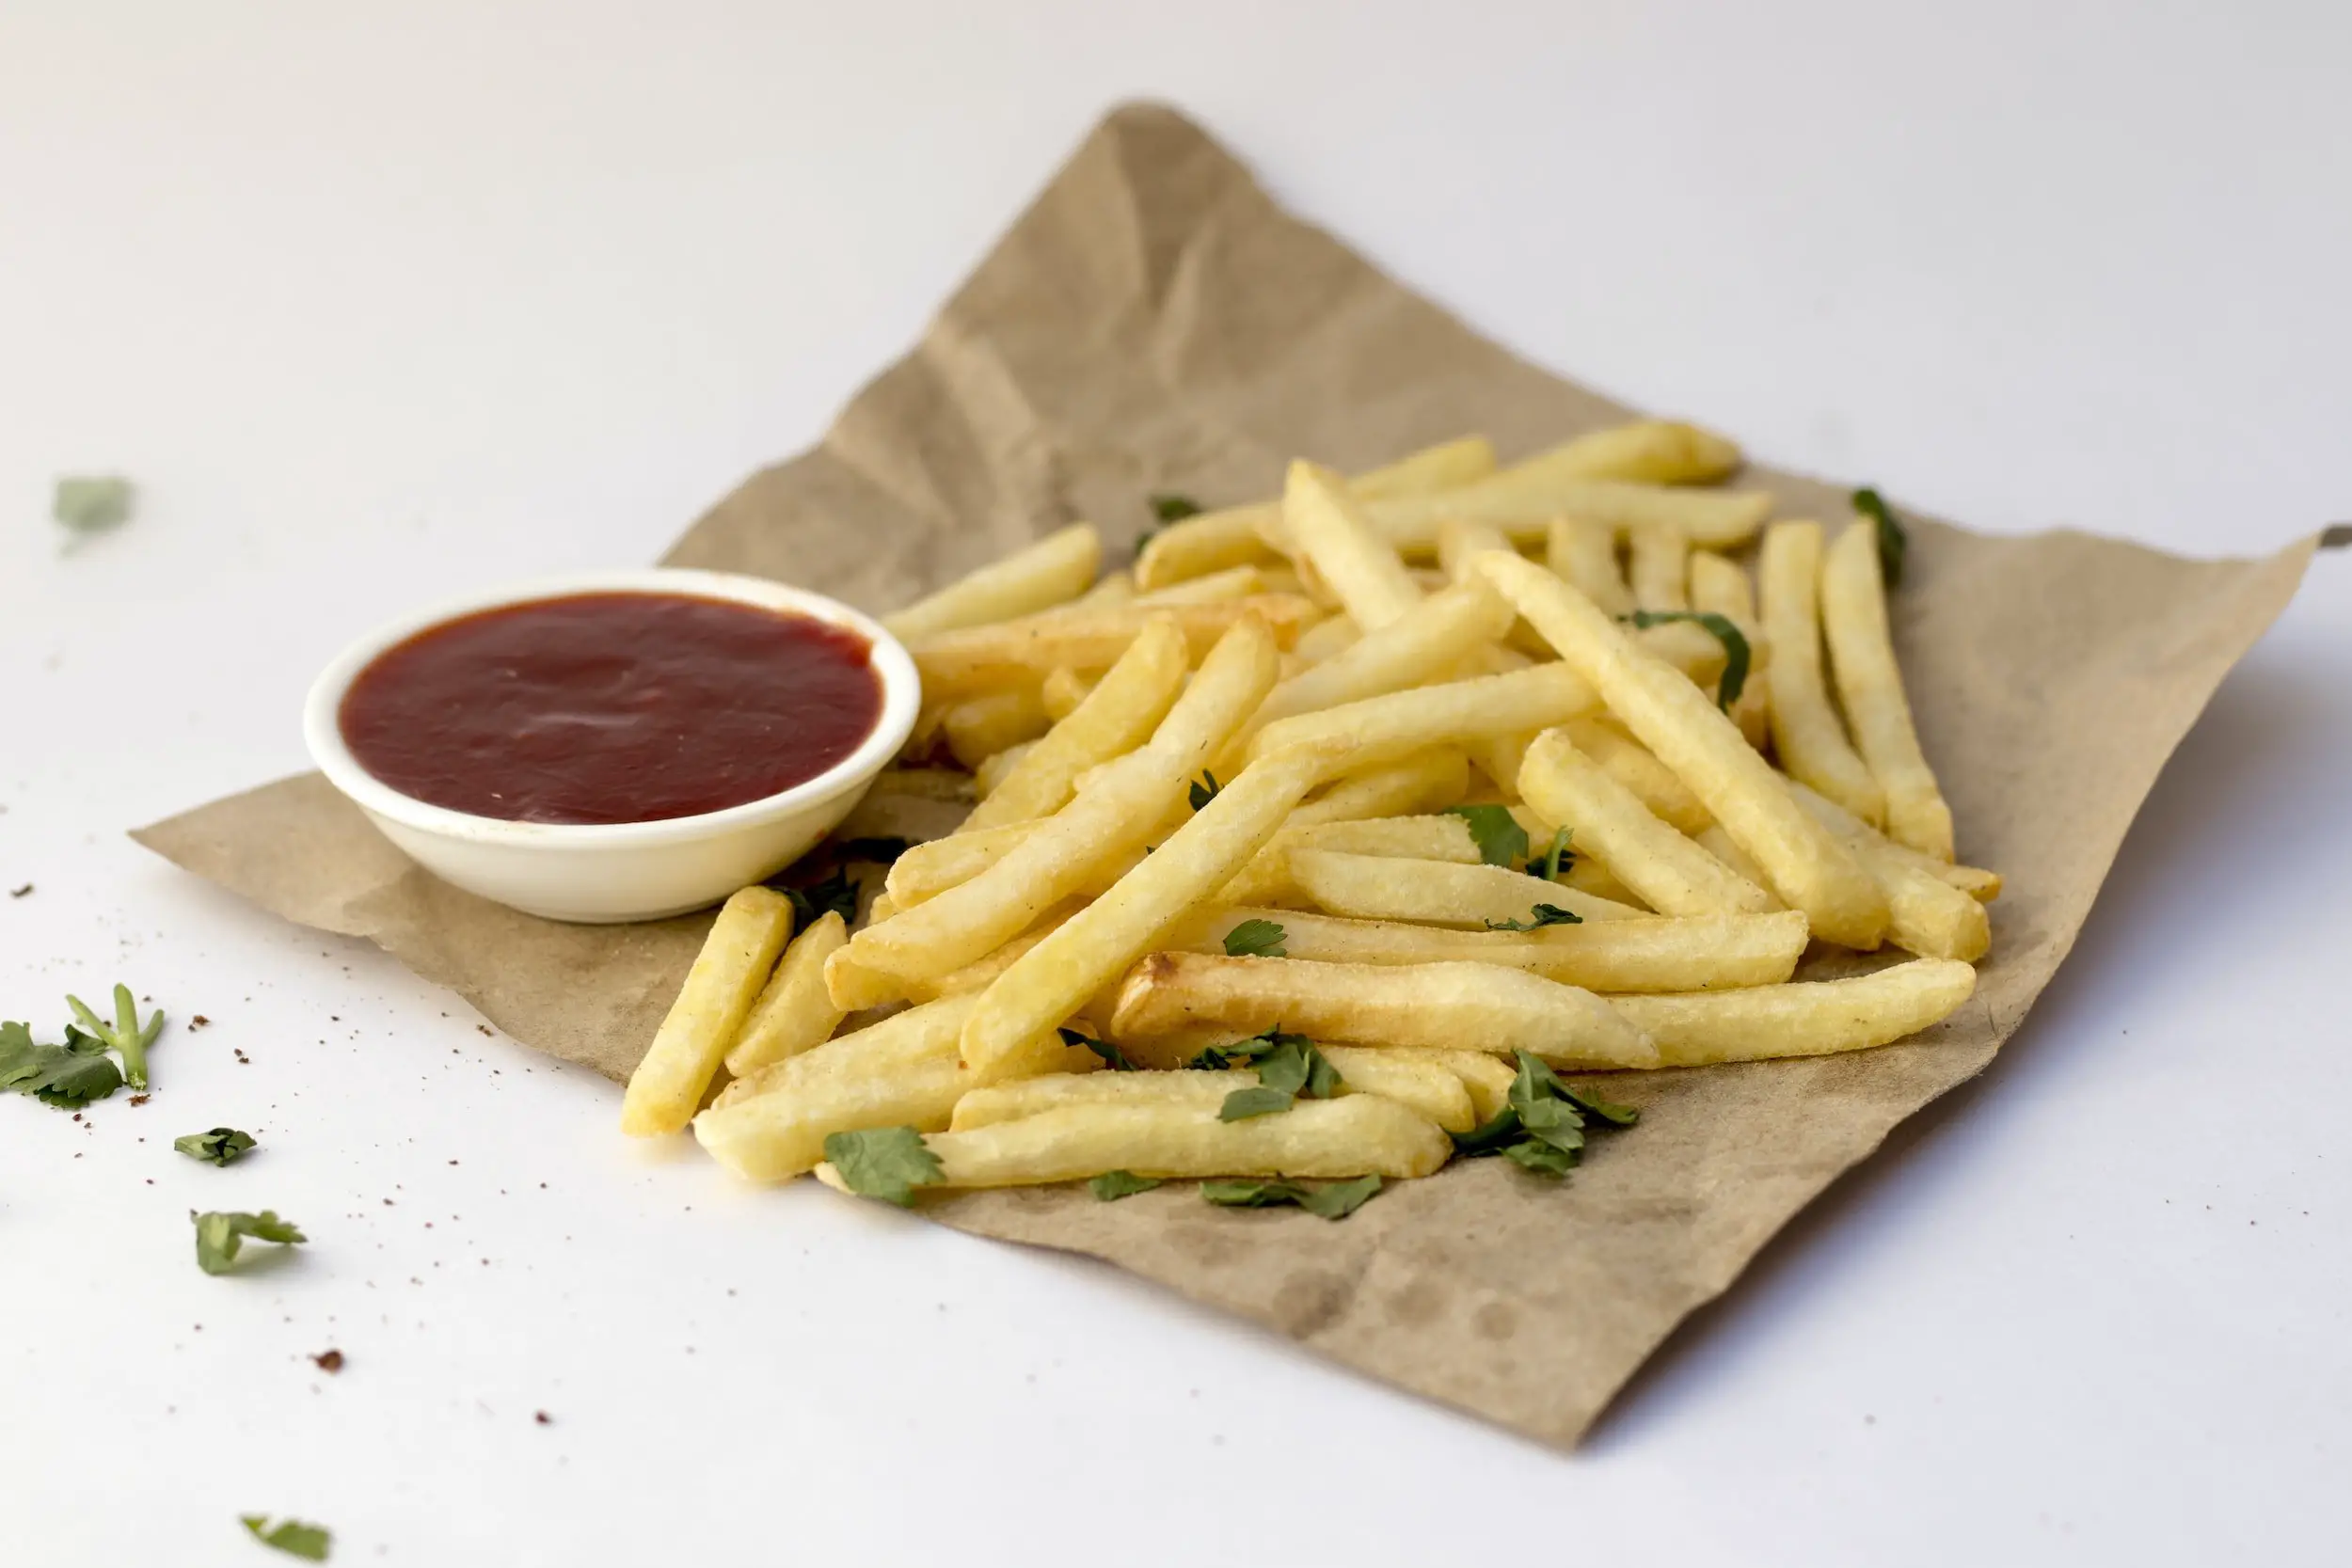 easiest wine tasting appetizer - french fries